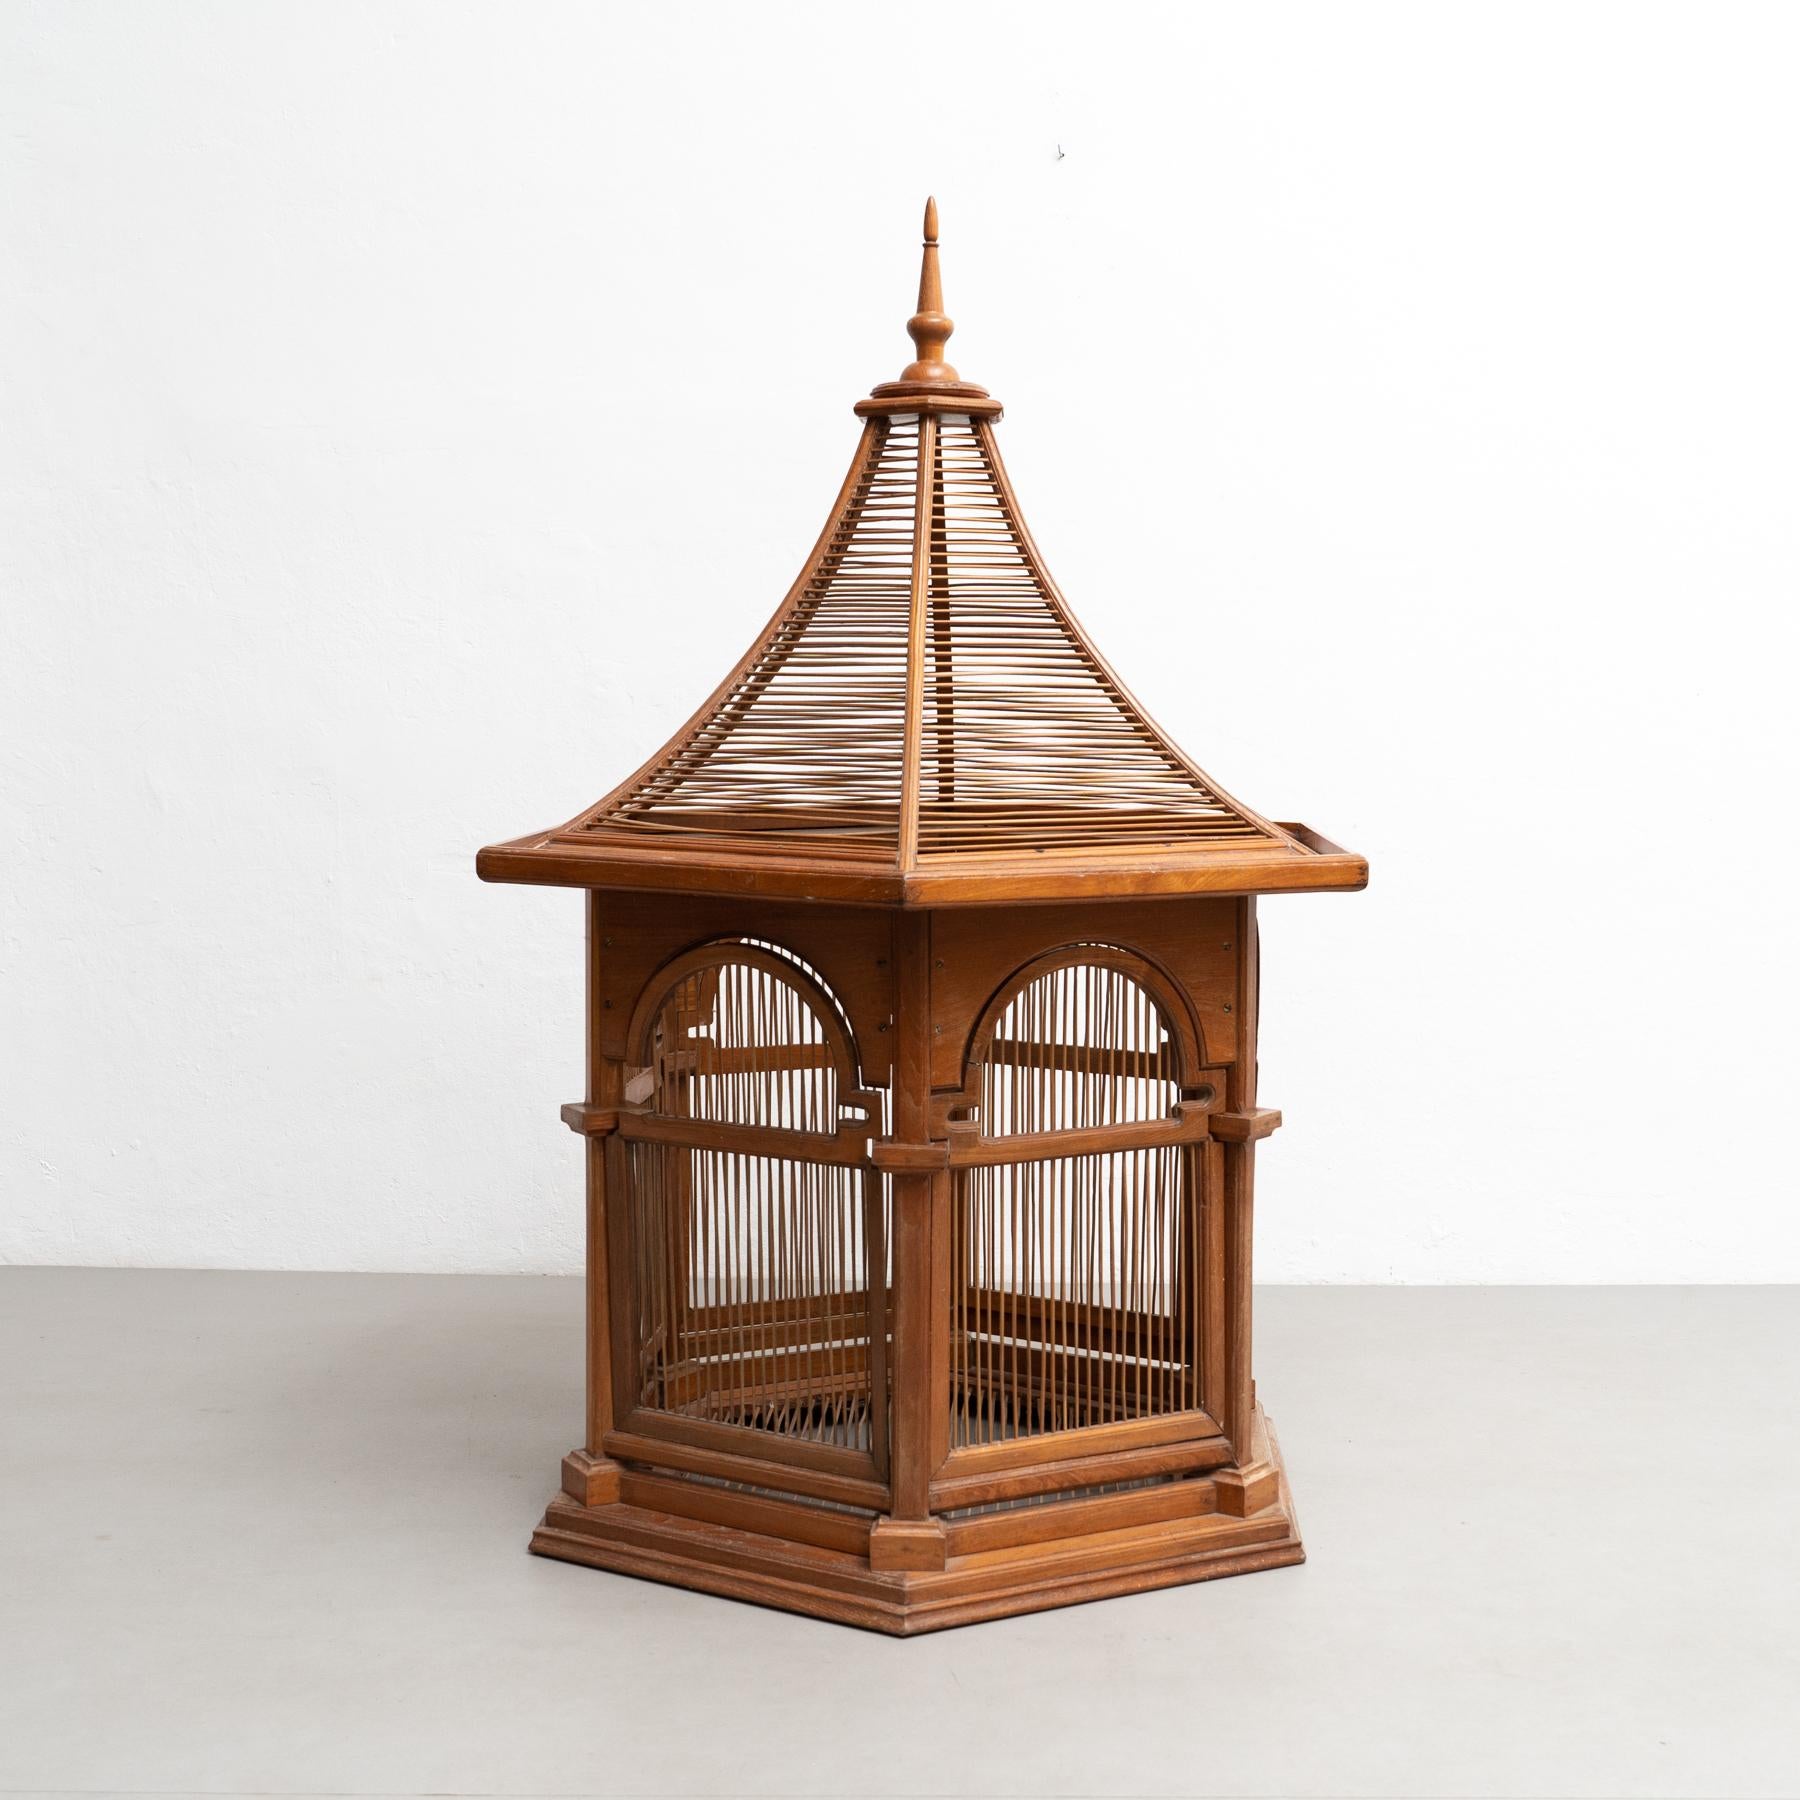 Spanish Large Vintage-Style Wooden Cage: Replica of Gaudi's 